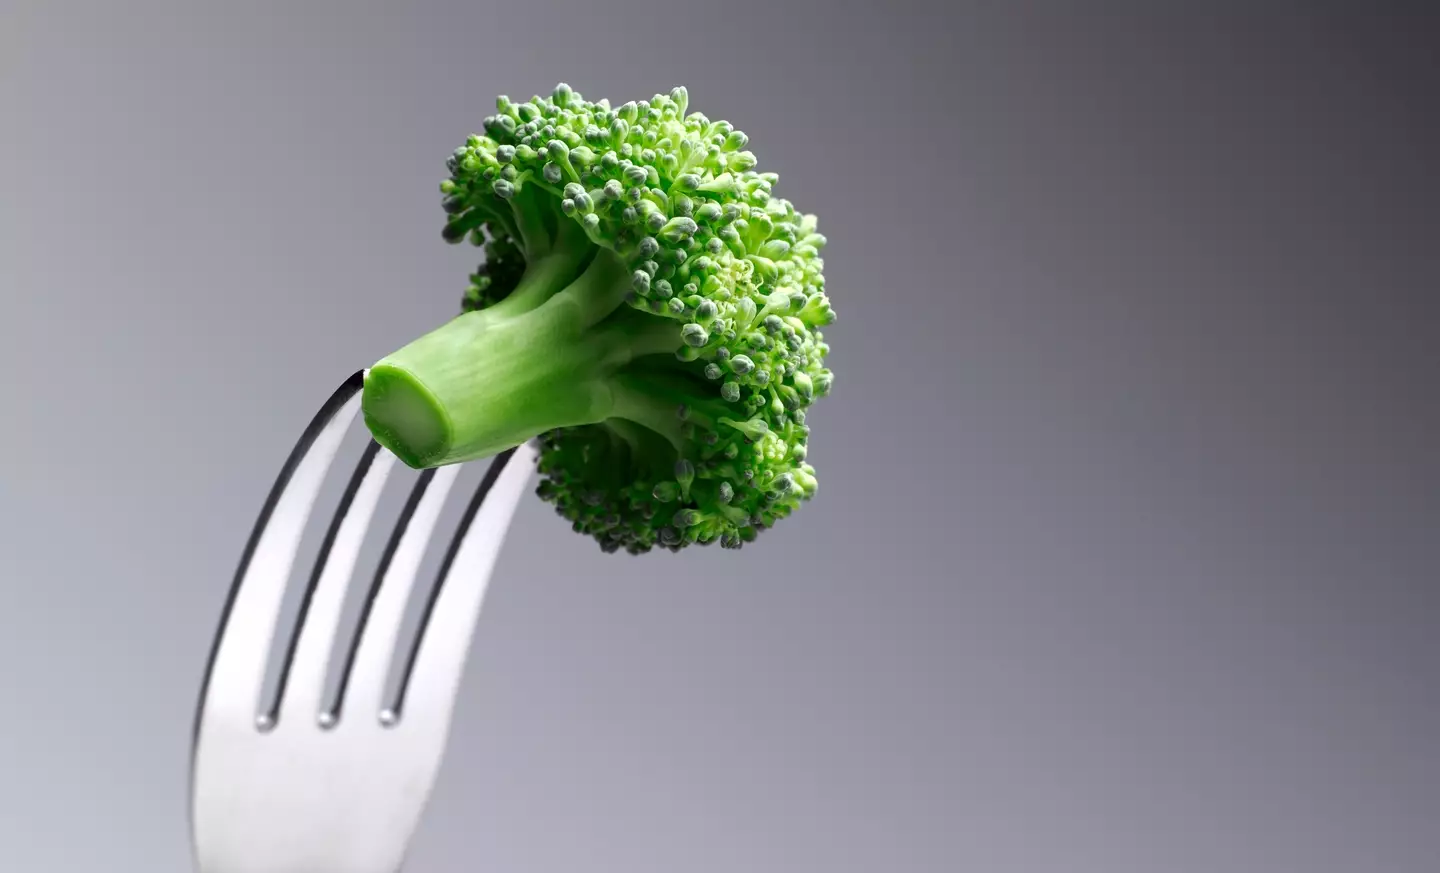 This is the broccoli we are all familiar with.